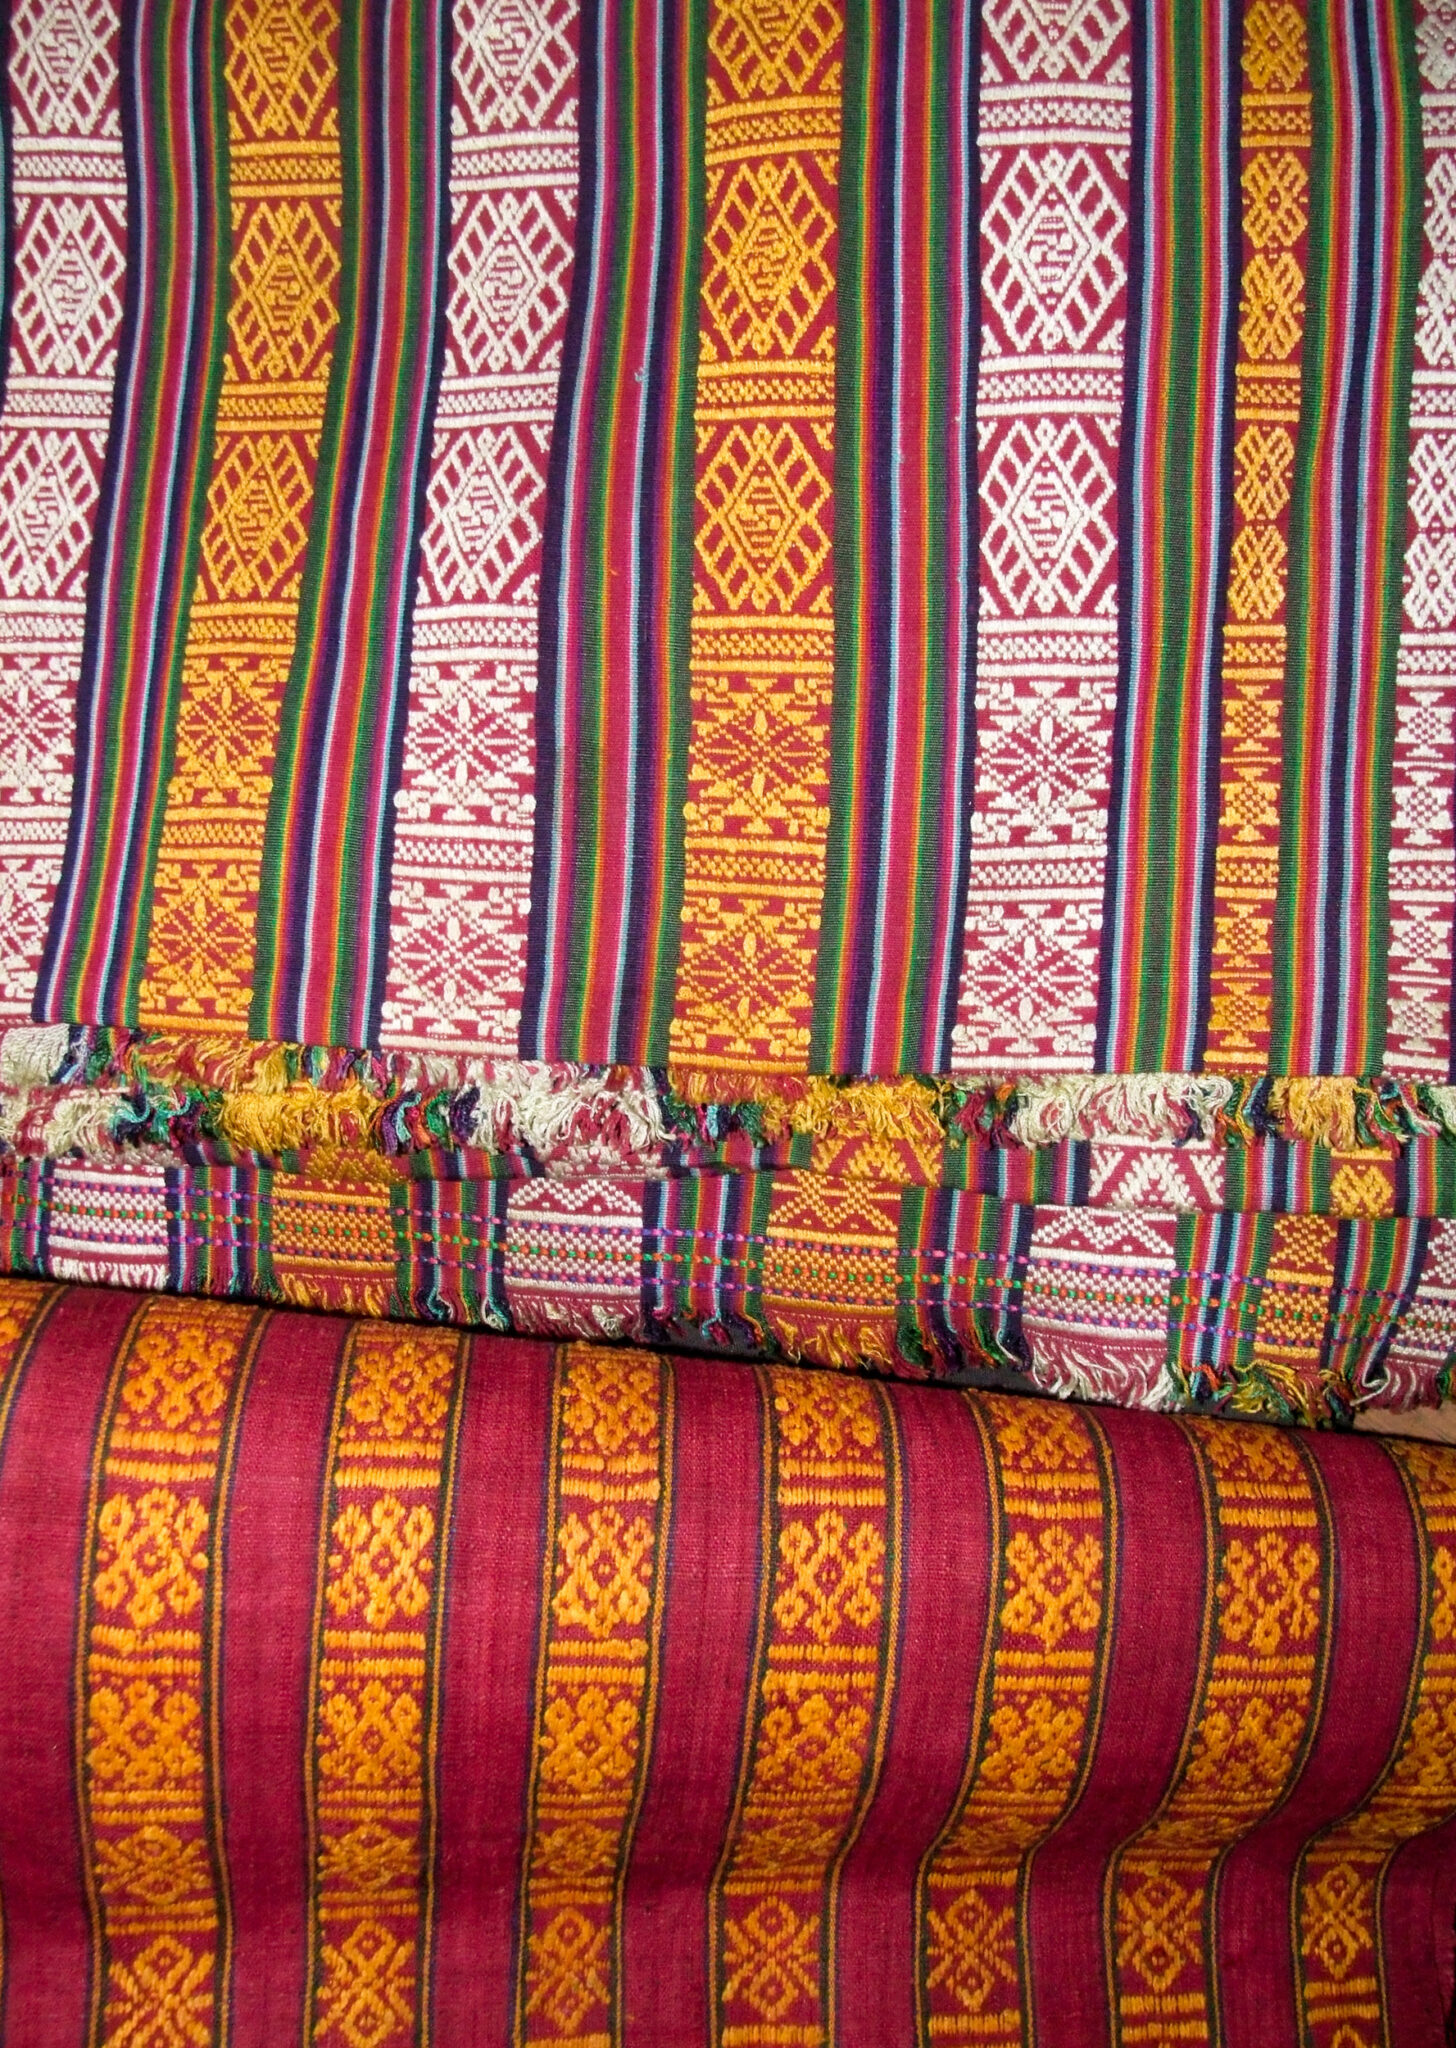 Two lengths of textile featuring vertical stripes decorated with geometric forms: Purple, white, and gold at top; Red and gold at bottom